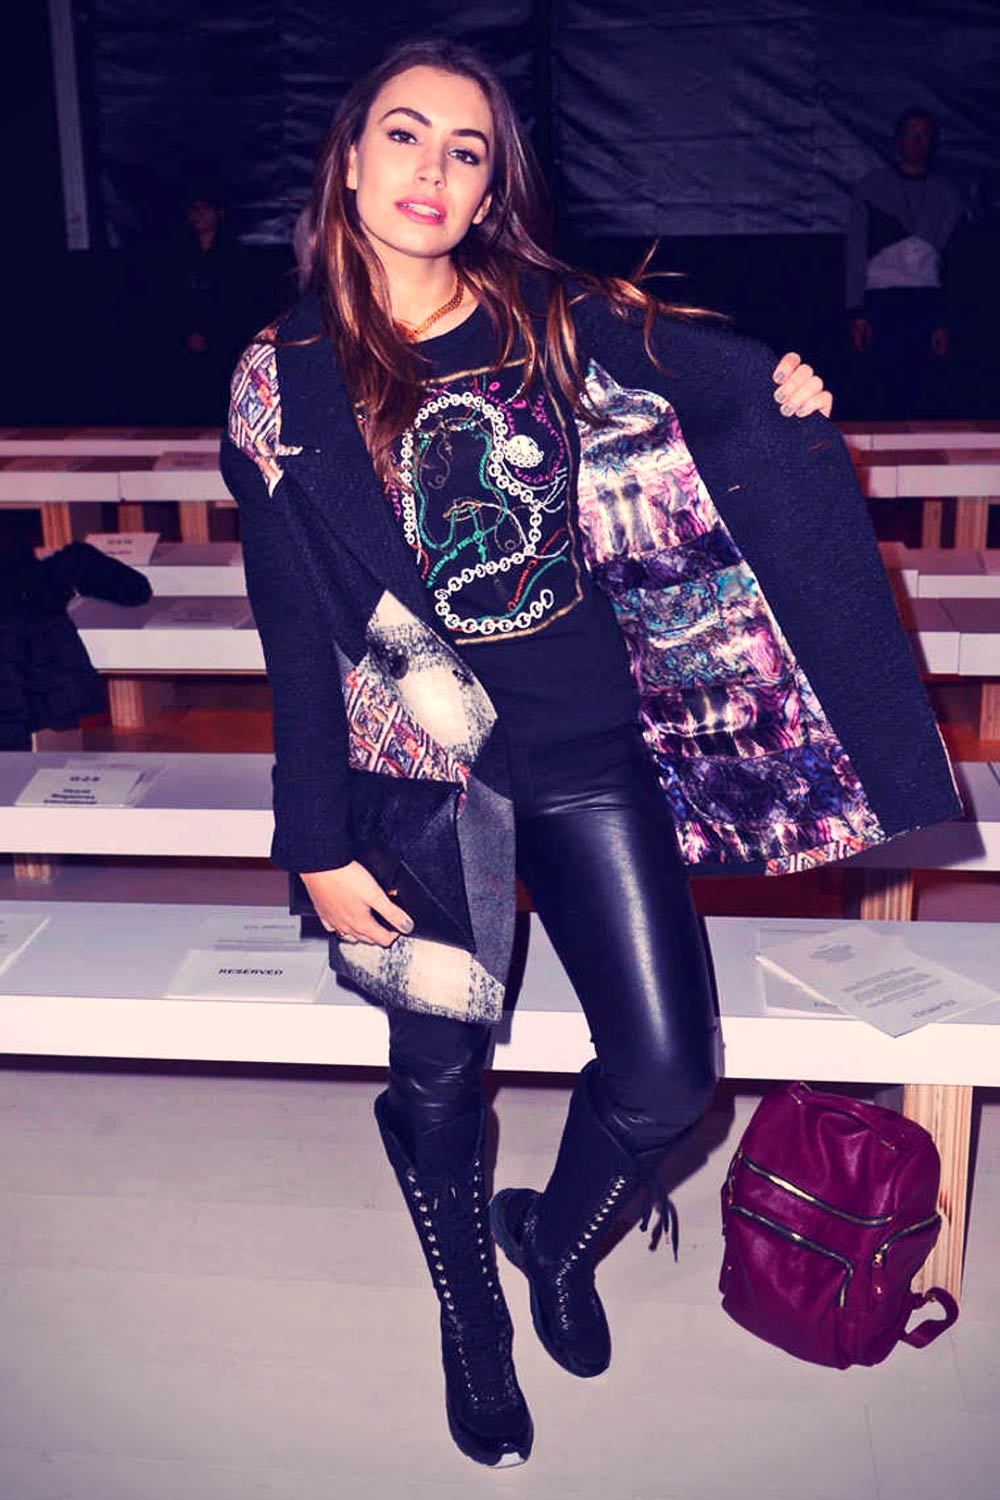 Sophie Simmons attends Custo Barcelona Fashion Show